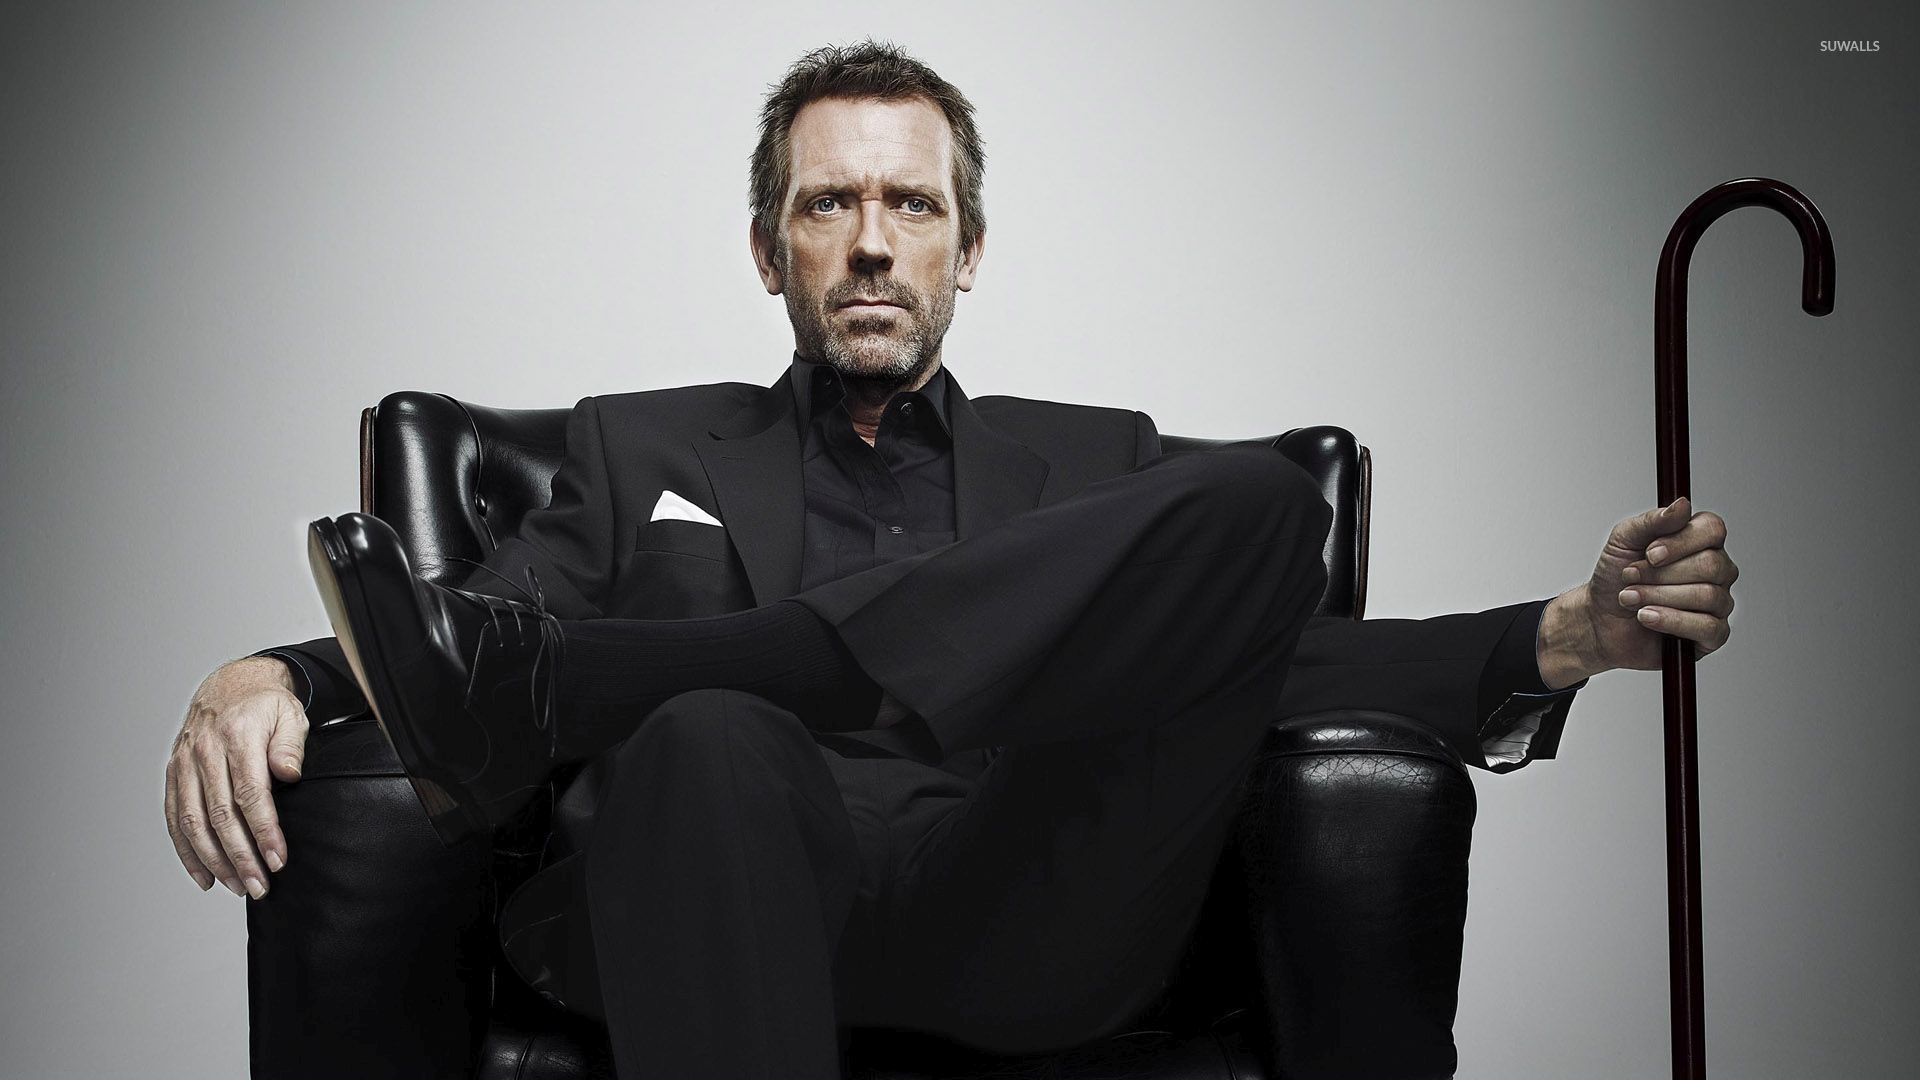 Dr House Gregory &Amp; Capsule In Art Wallpapers